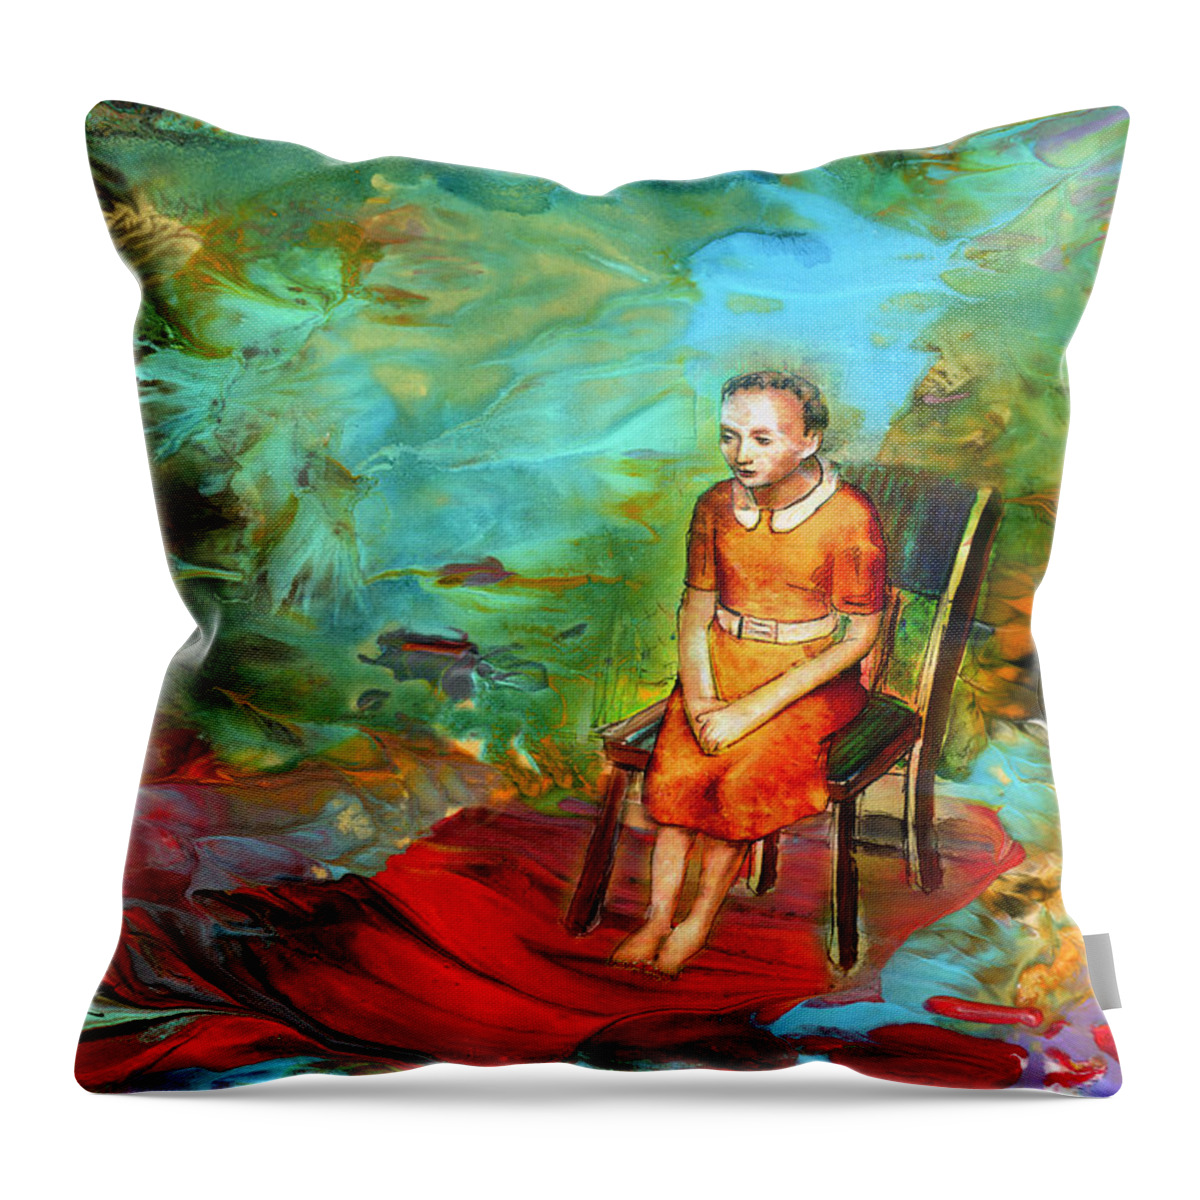 Fantasy Throw Pillow featuring the painting To Be Or Not To Be by Miki De Goodaboom